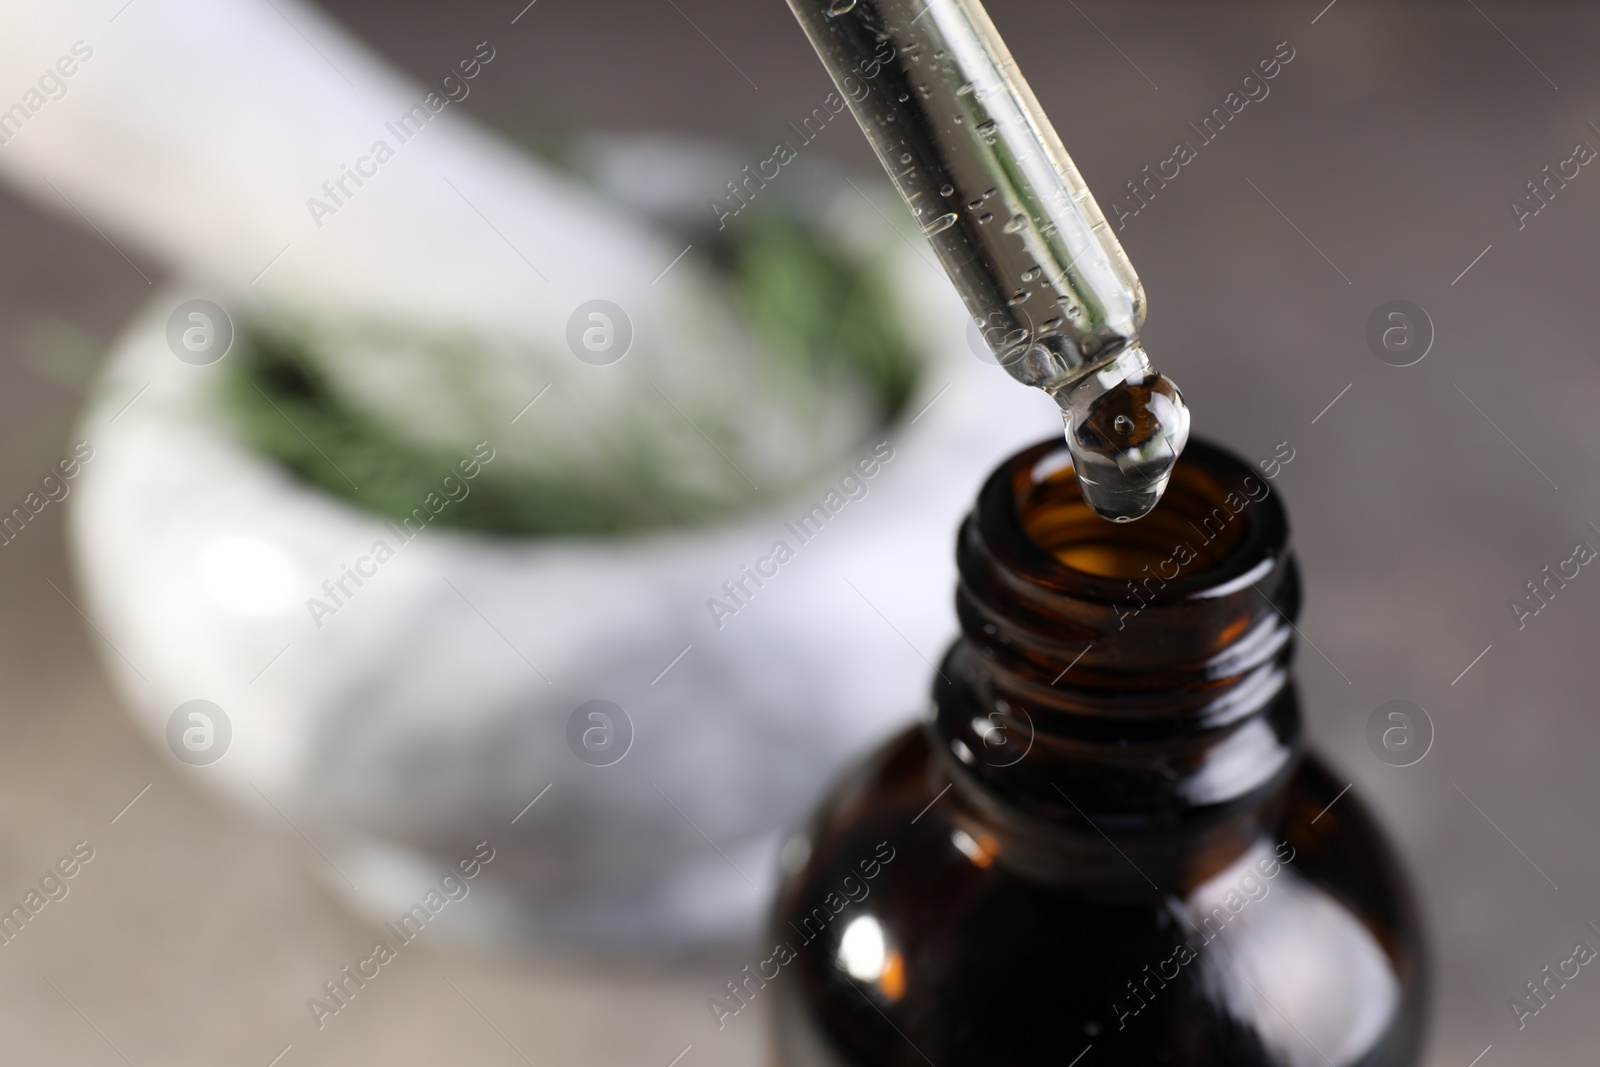 Photo of Dripping dill essential oil from pipette into bottle on blurred background, closeup. Space for text